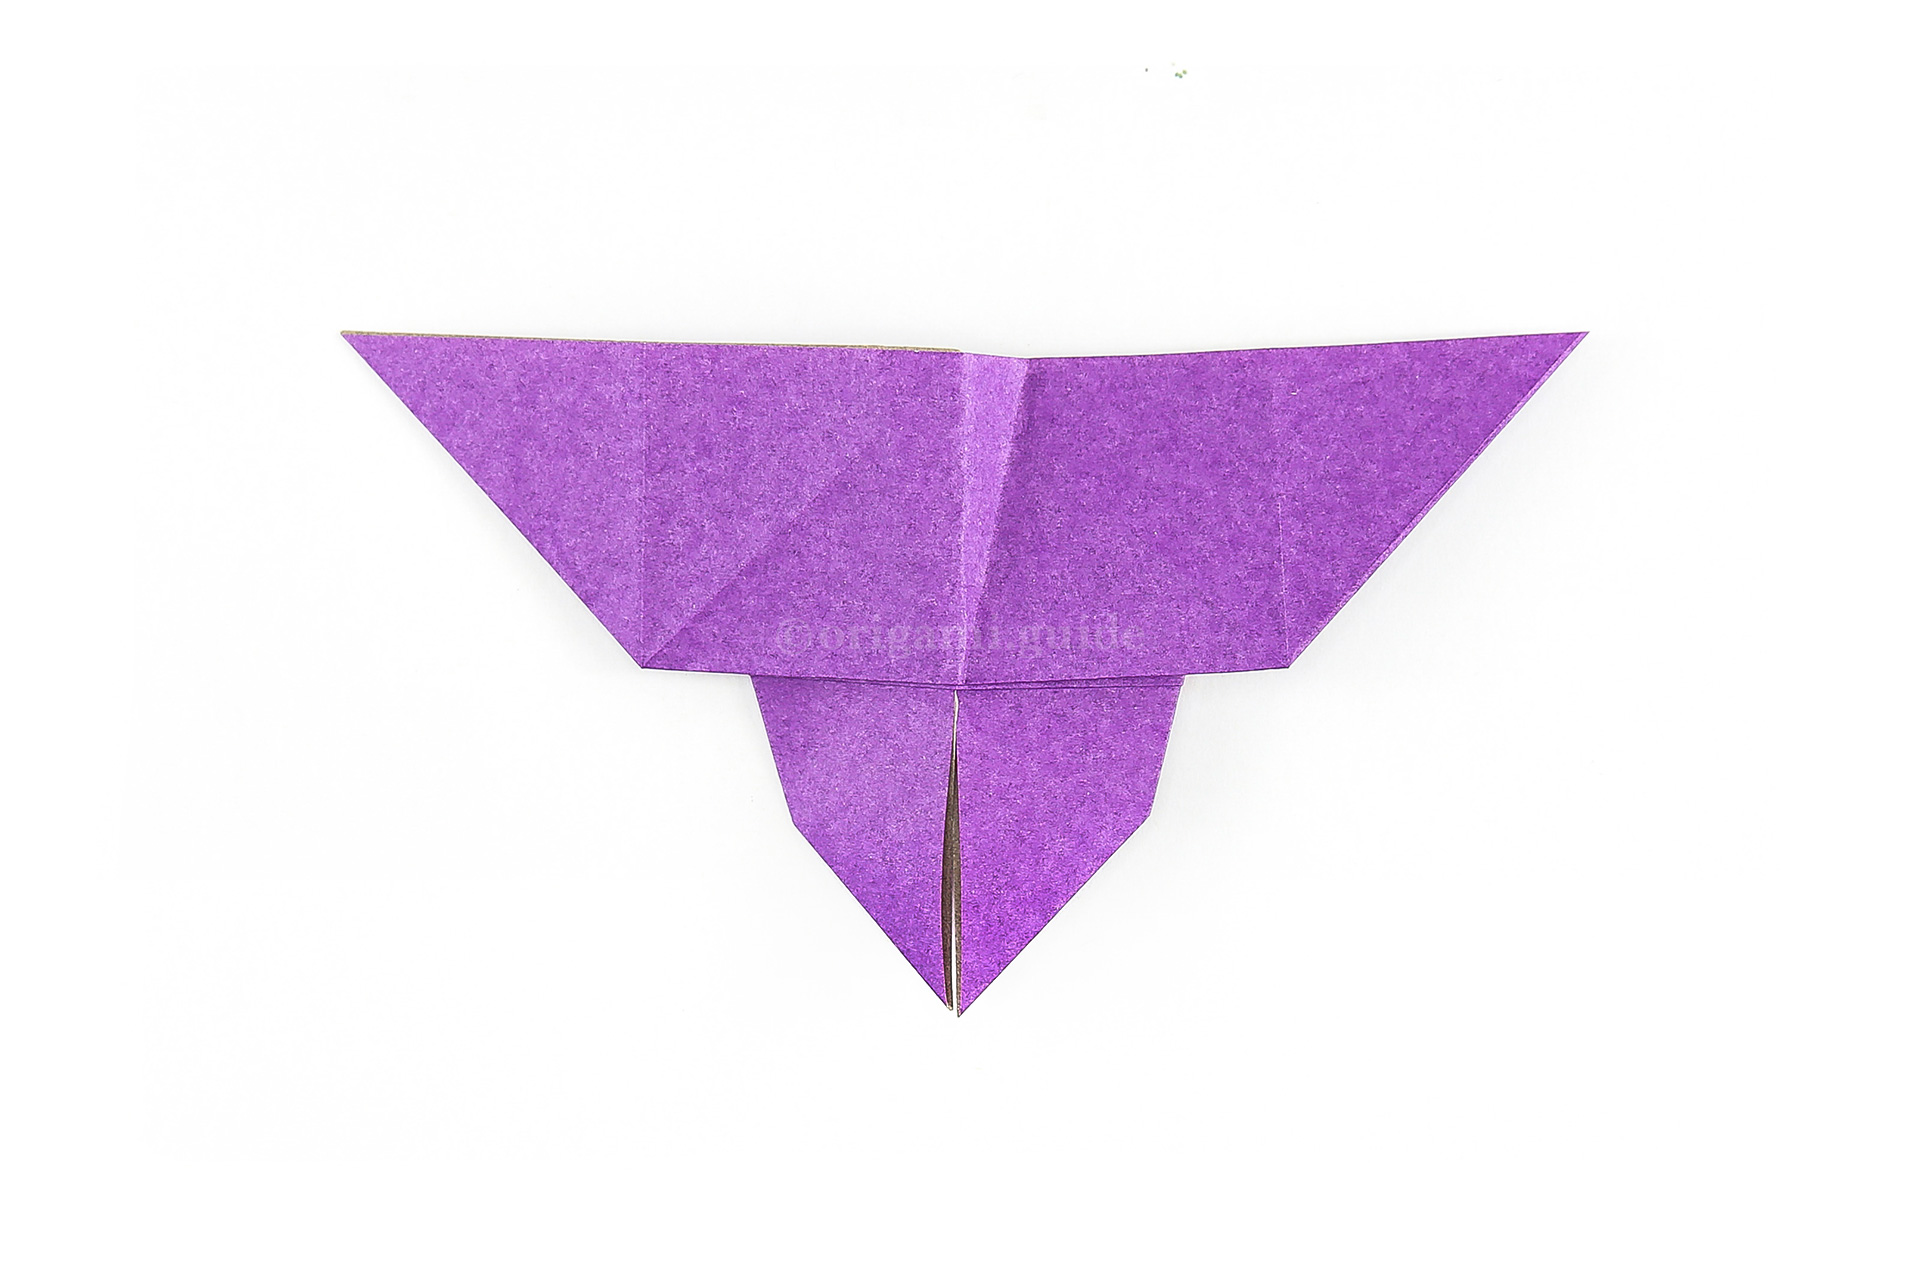 Unfold the previous 2 steps and flip the paper over to the front of the butterfly.